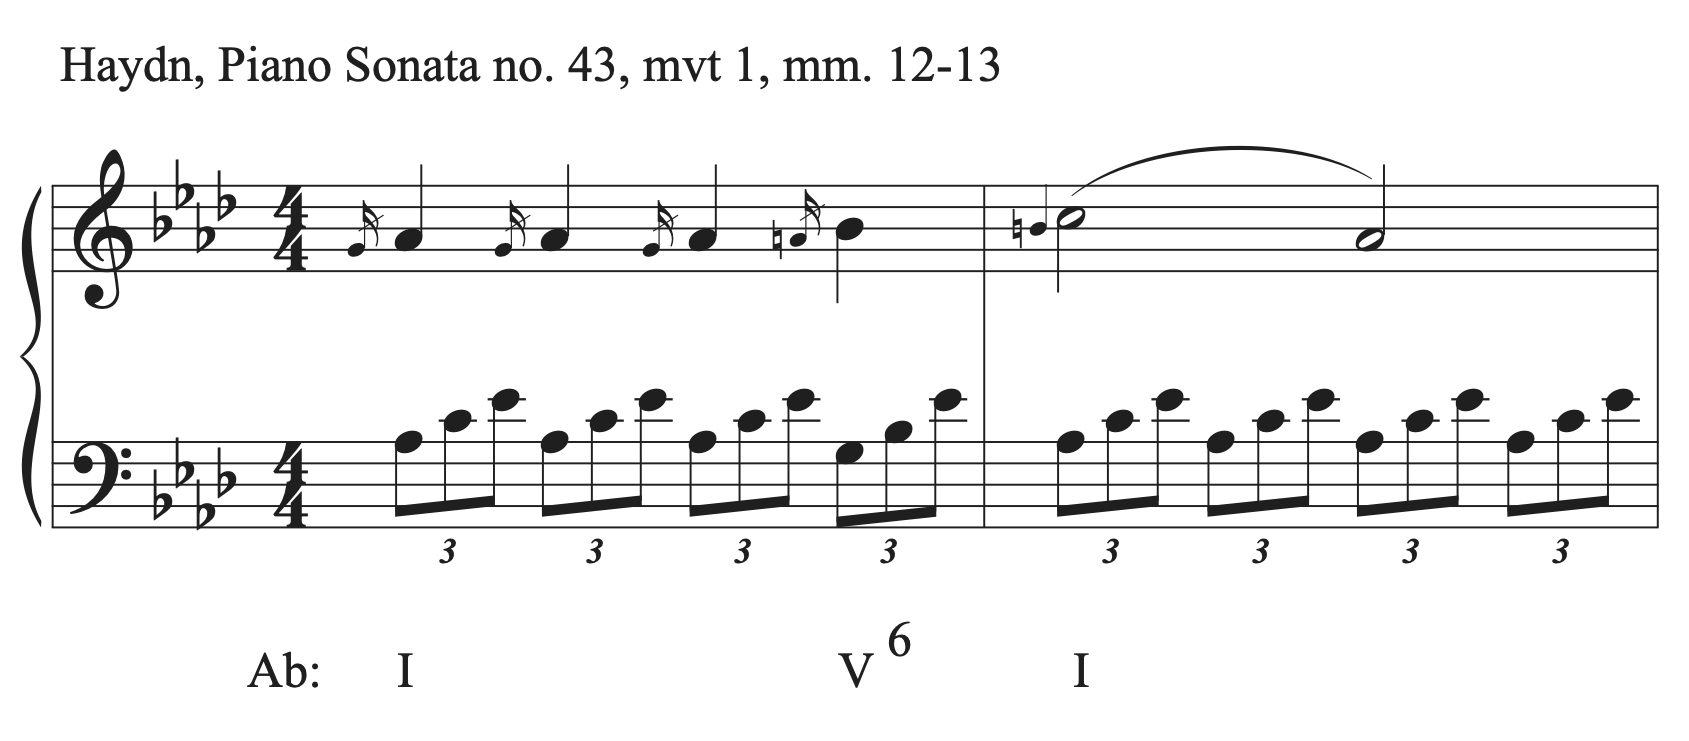 Excerpt from Haydn's Piano Sonata number 43, movement 1, measures 12 to 13.